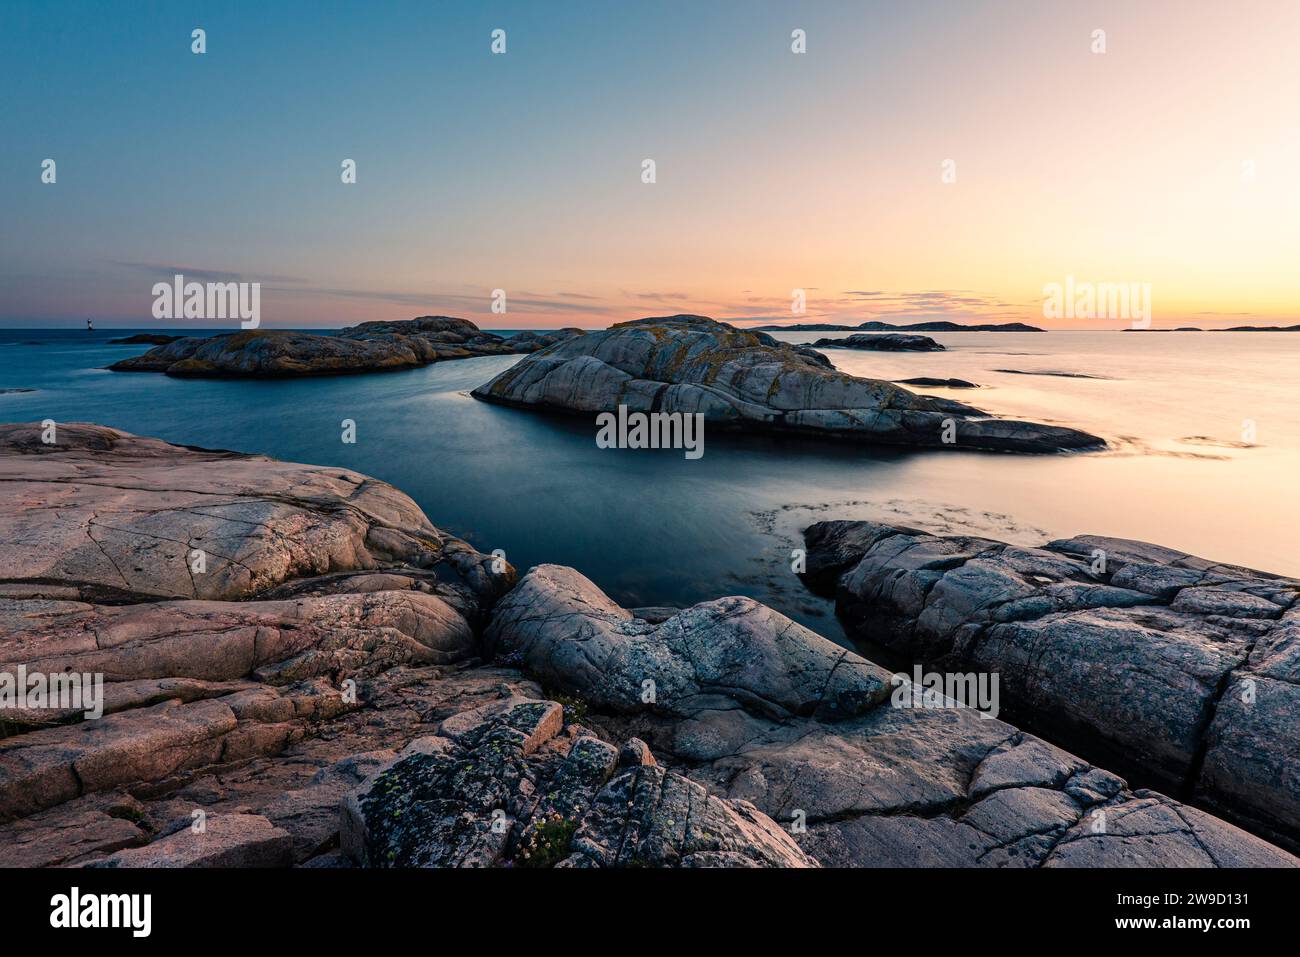 Glowing sunset on the rocks in the Tjurpannan nature reserve in the archipelago of the Swedish west coast Stock Photo